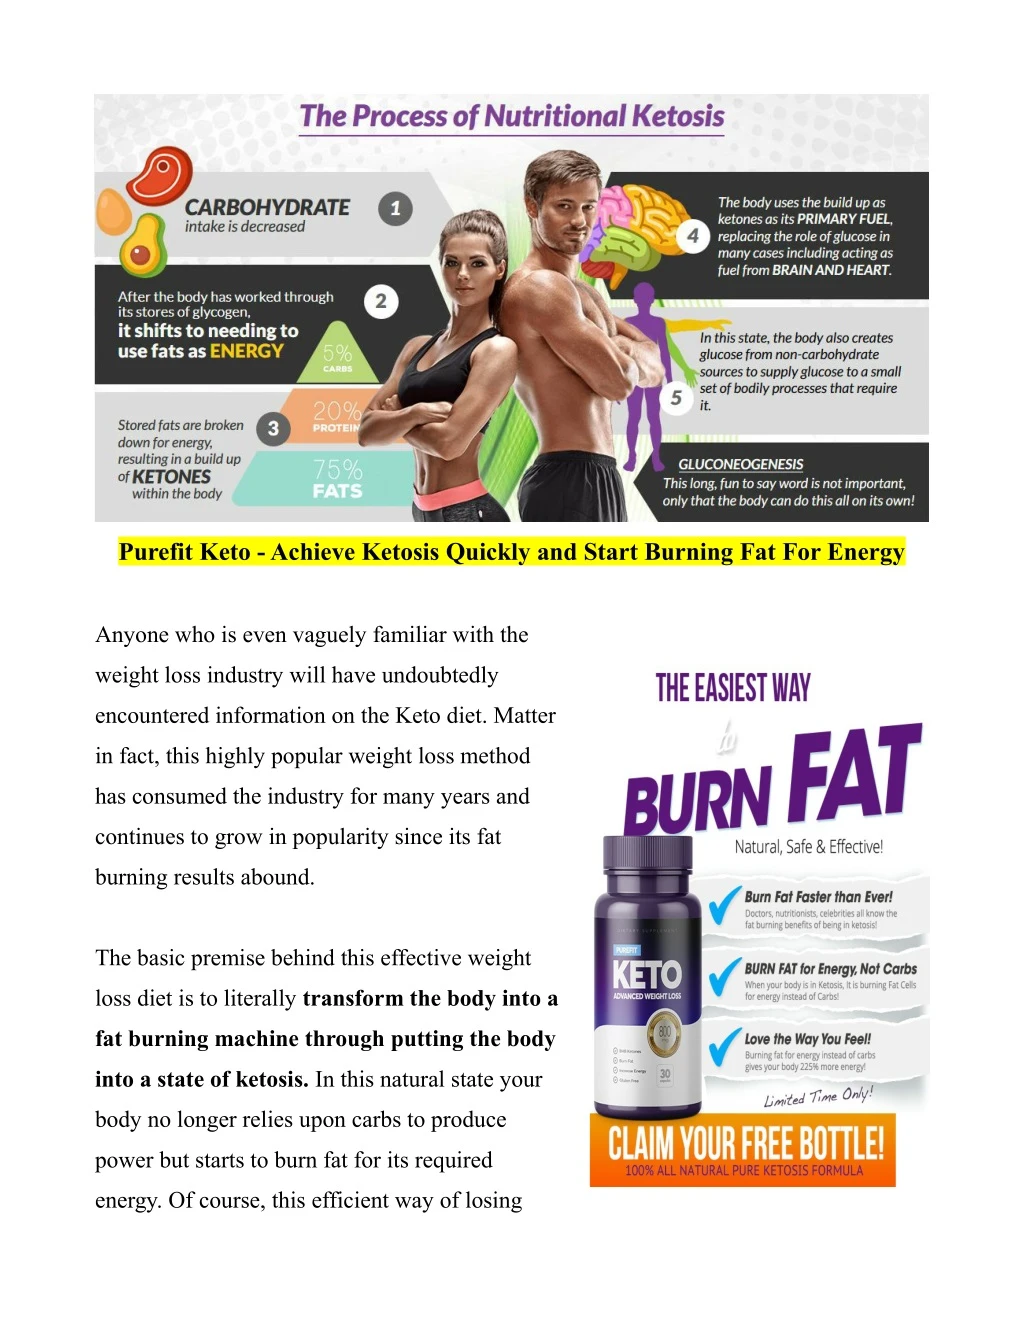 purefit keto achieve ketosis quickly and start